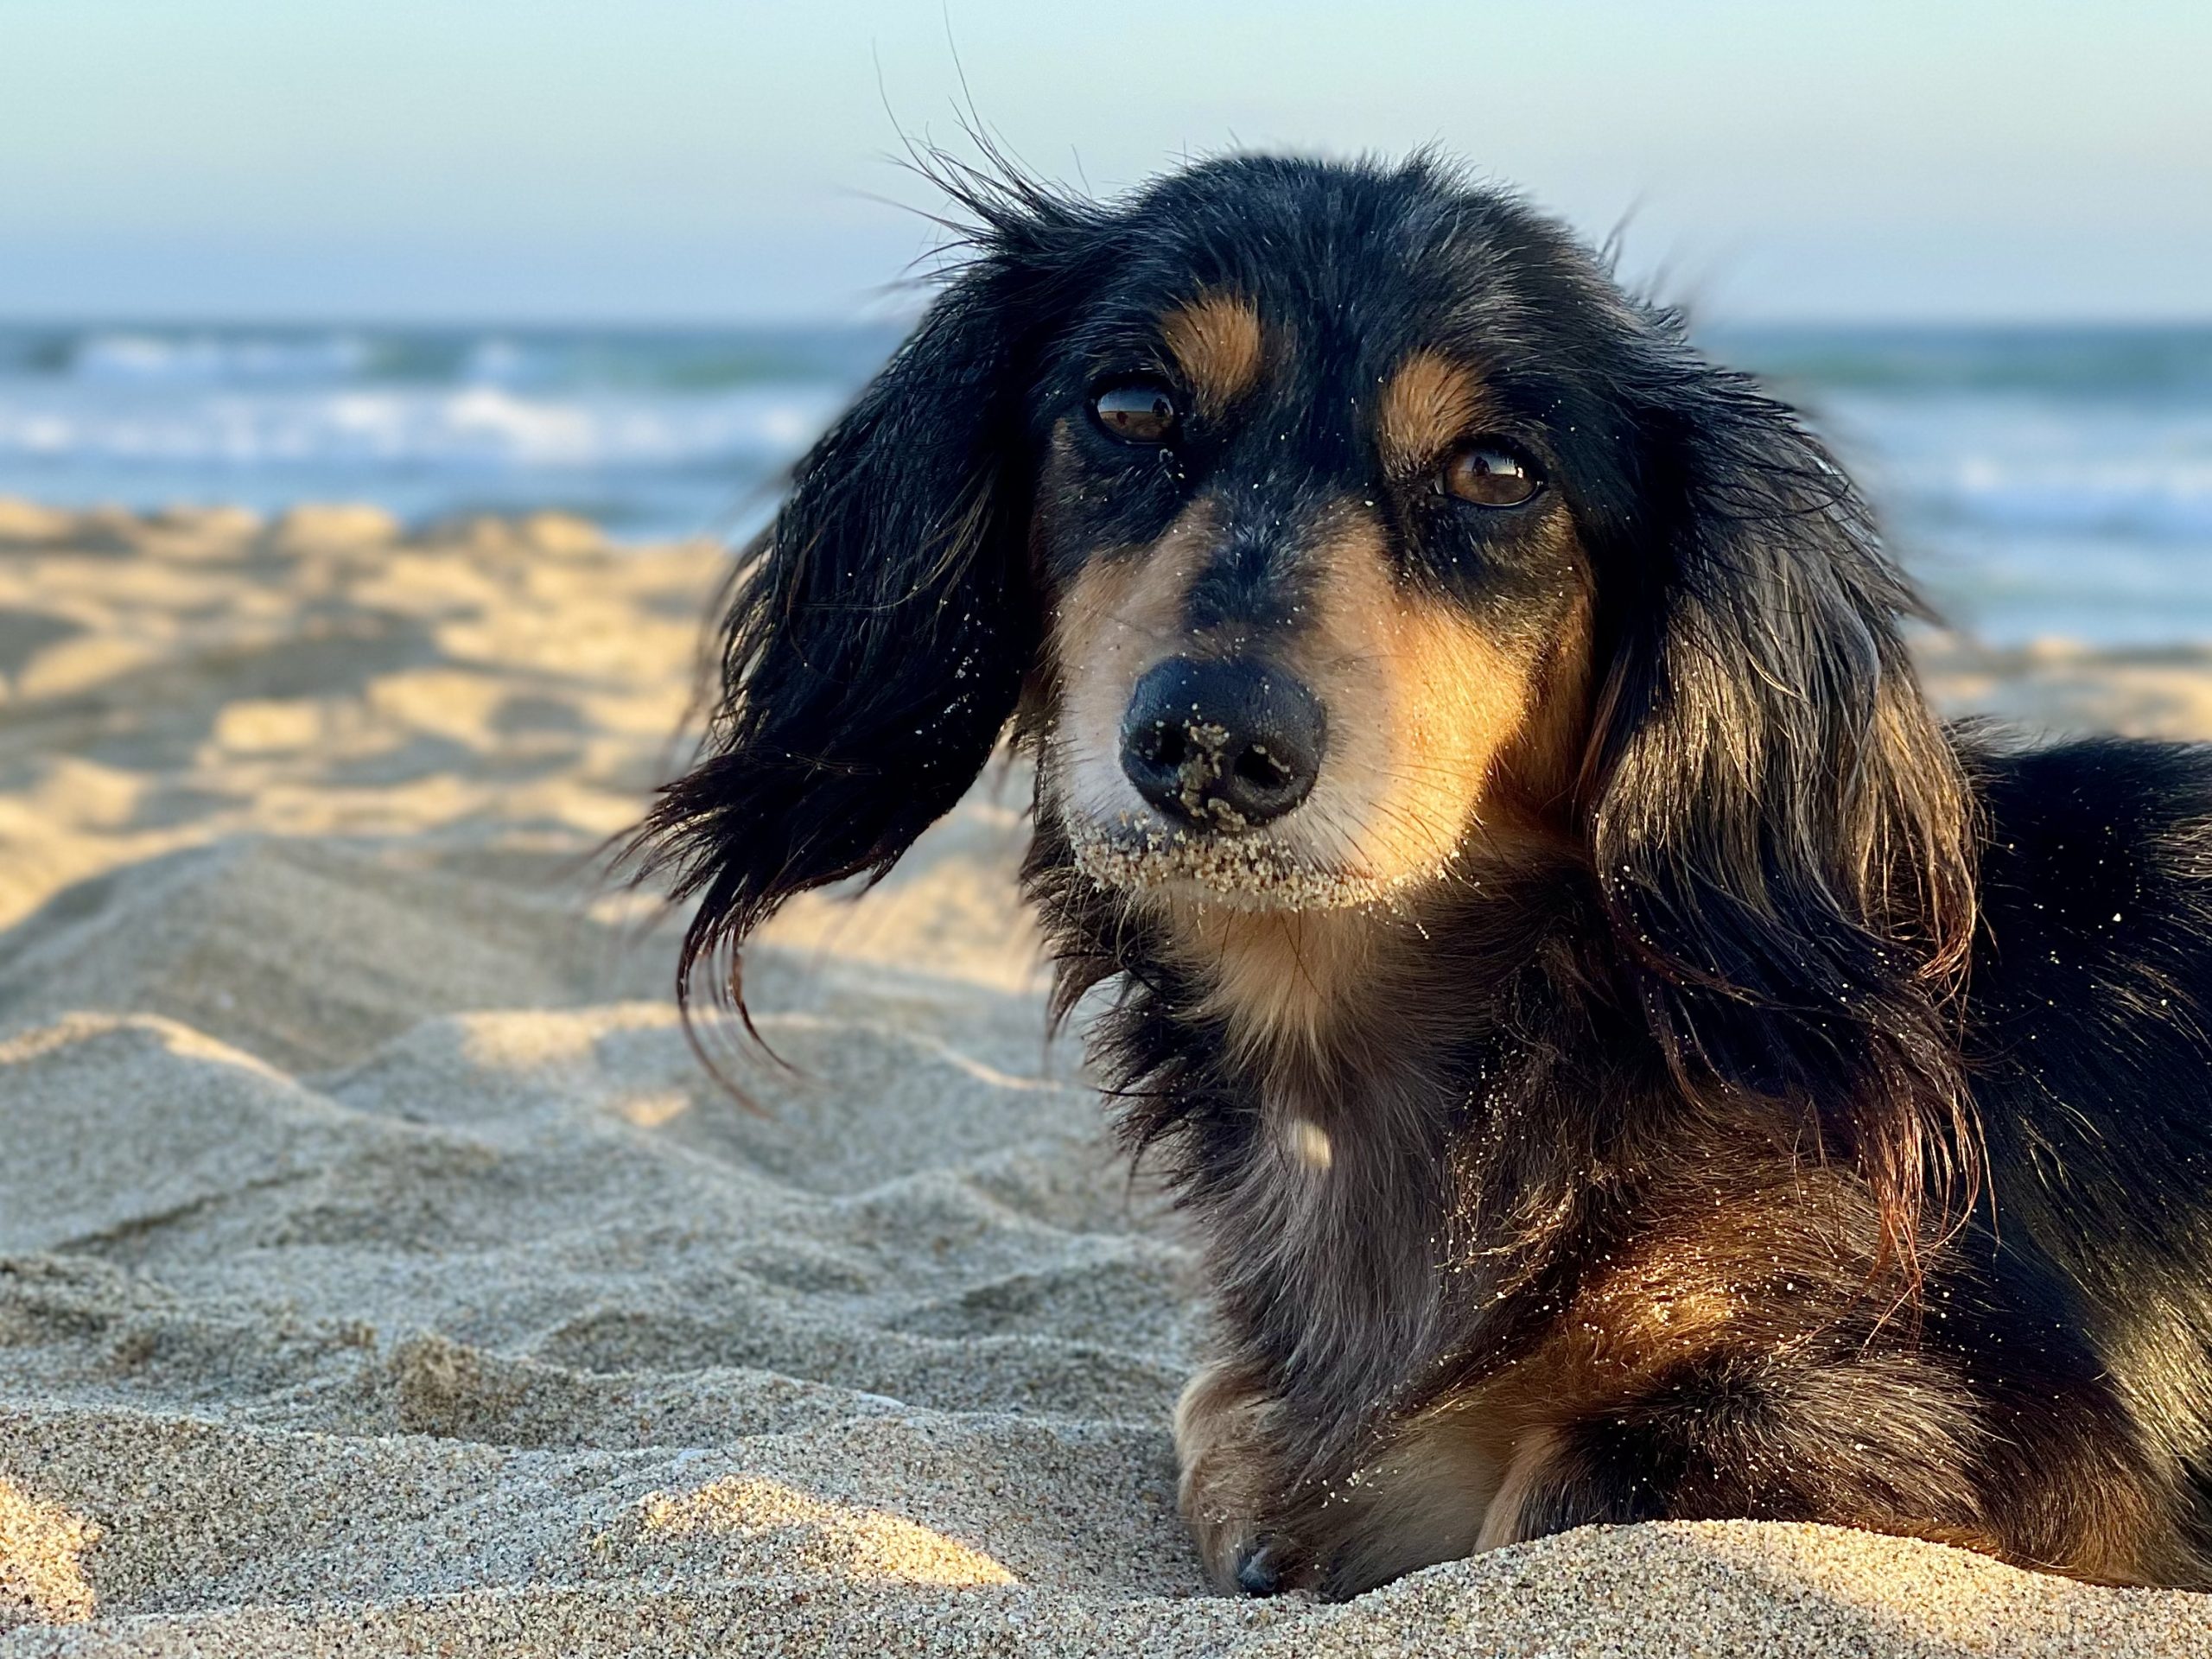 Darcy at the beach